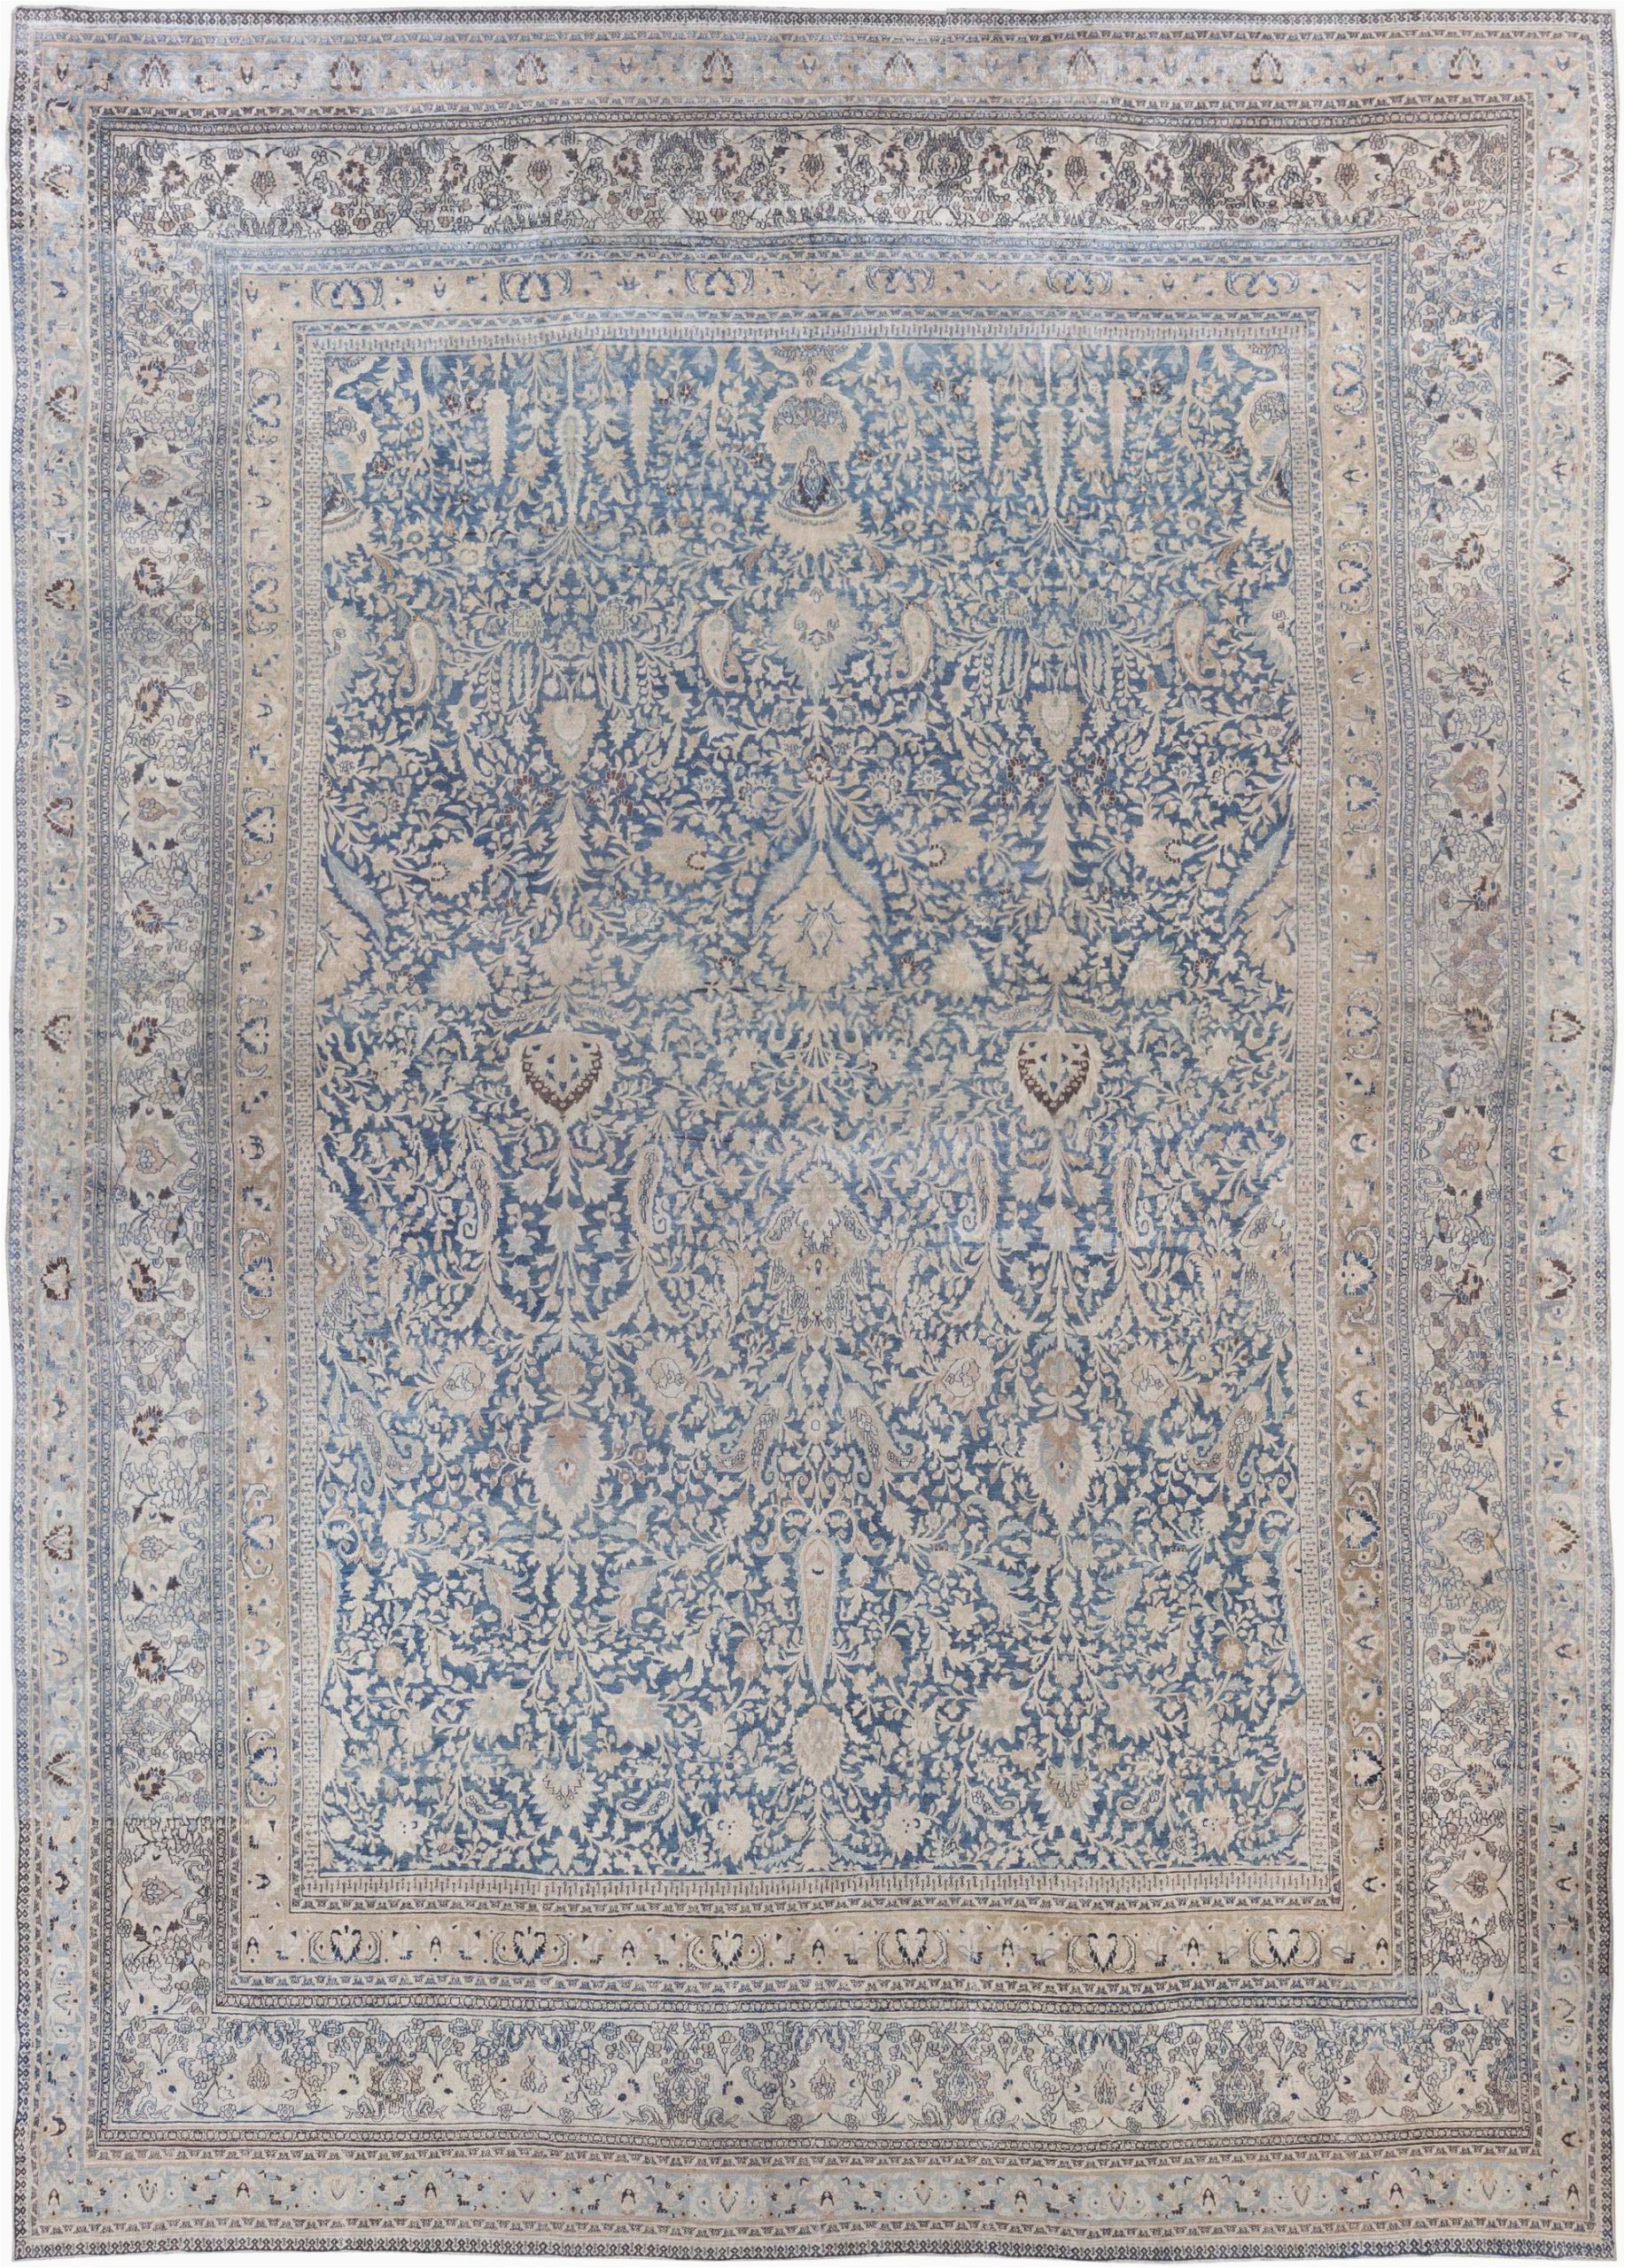 antique rugs persian khorassan blue floral abstract 23x16 bb6791